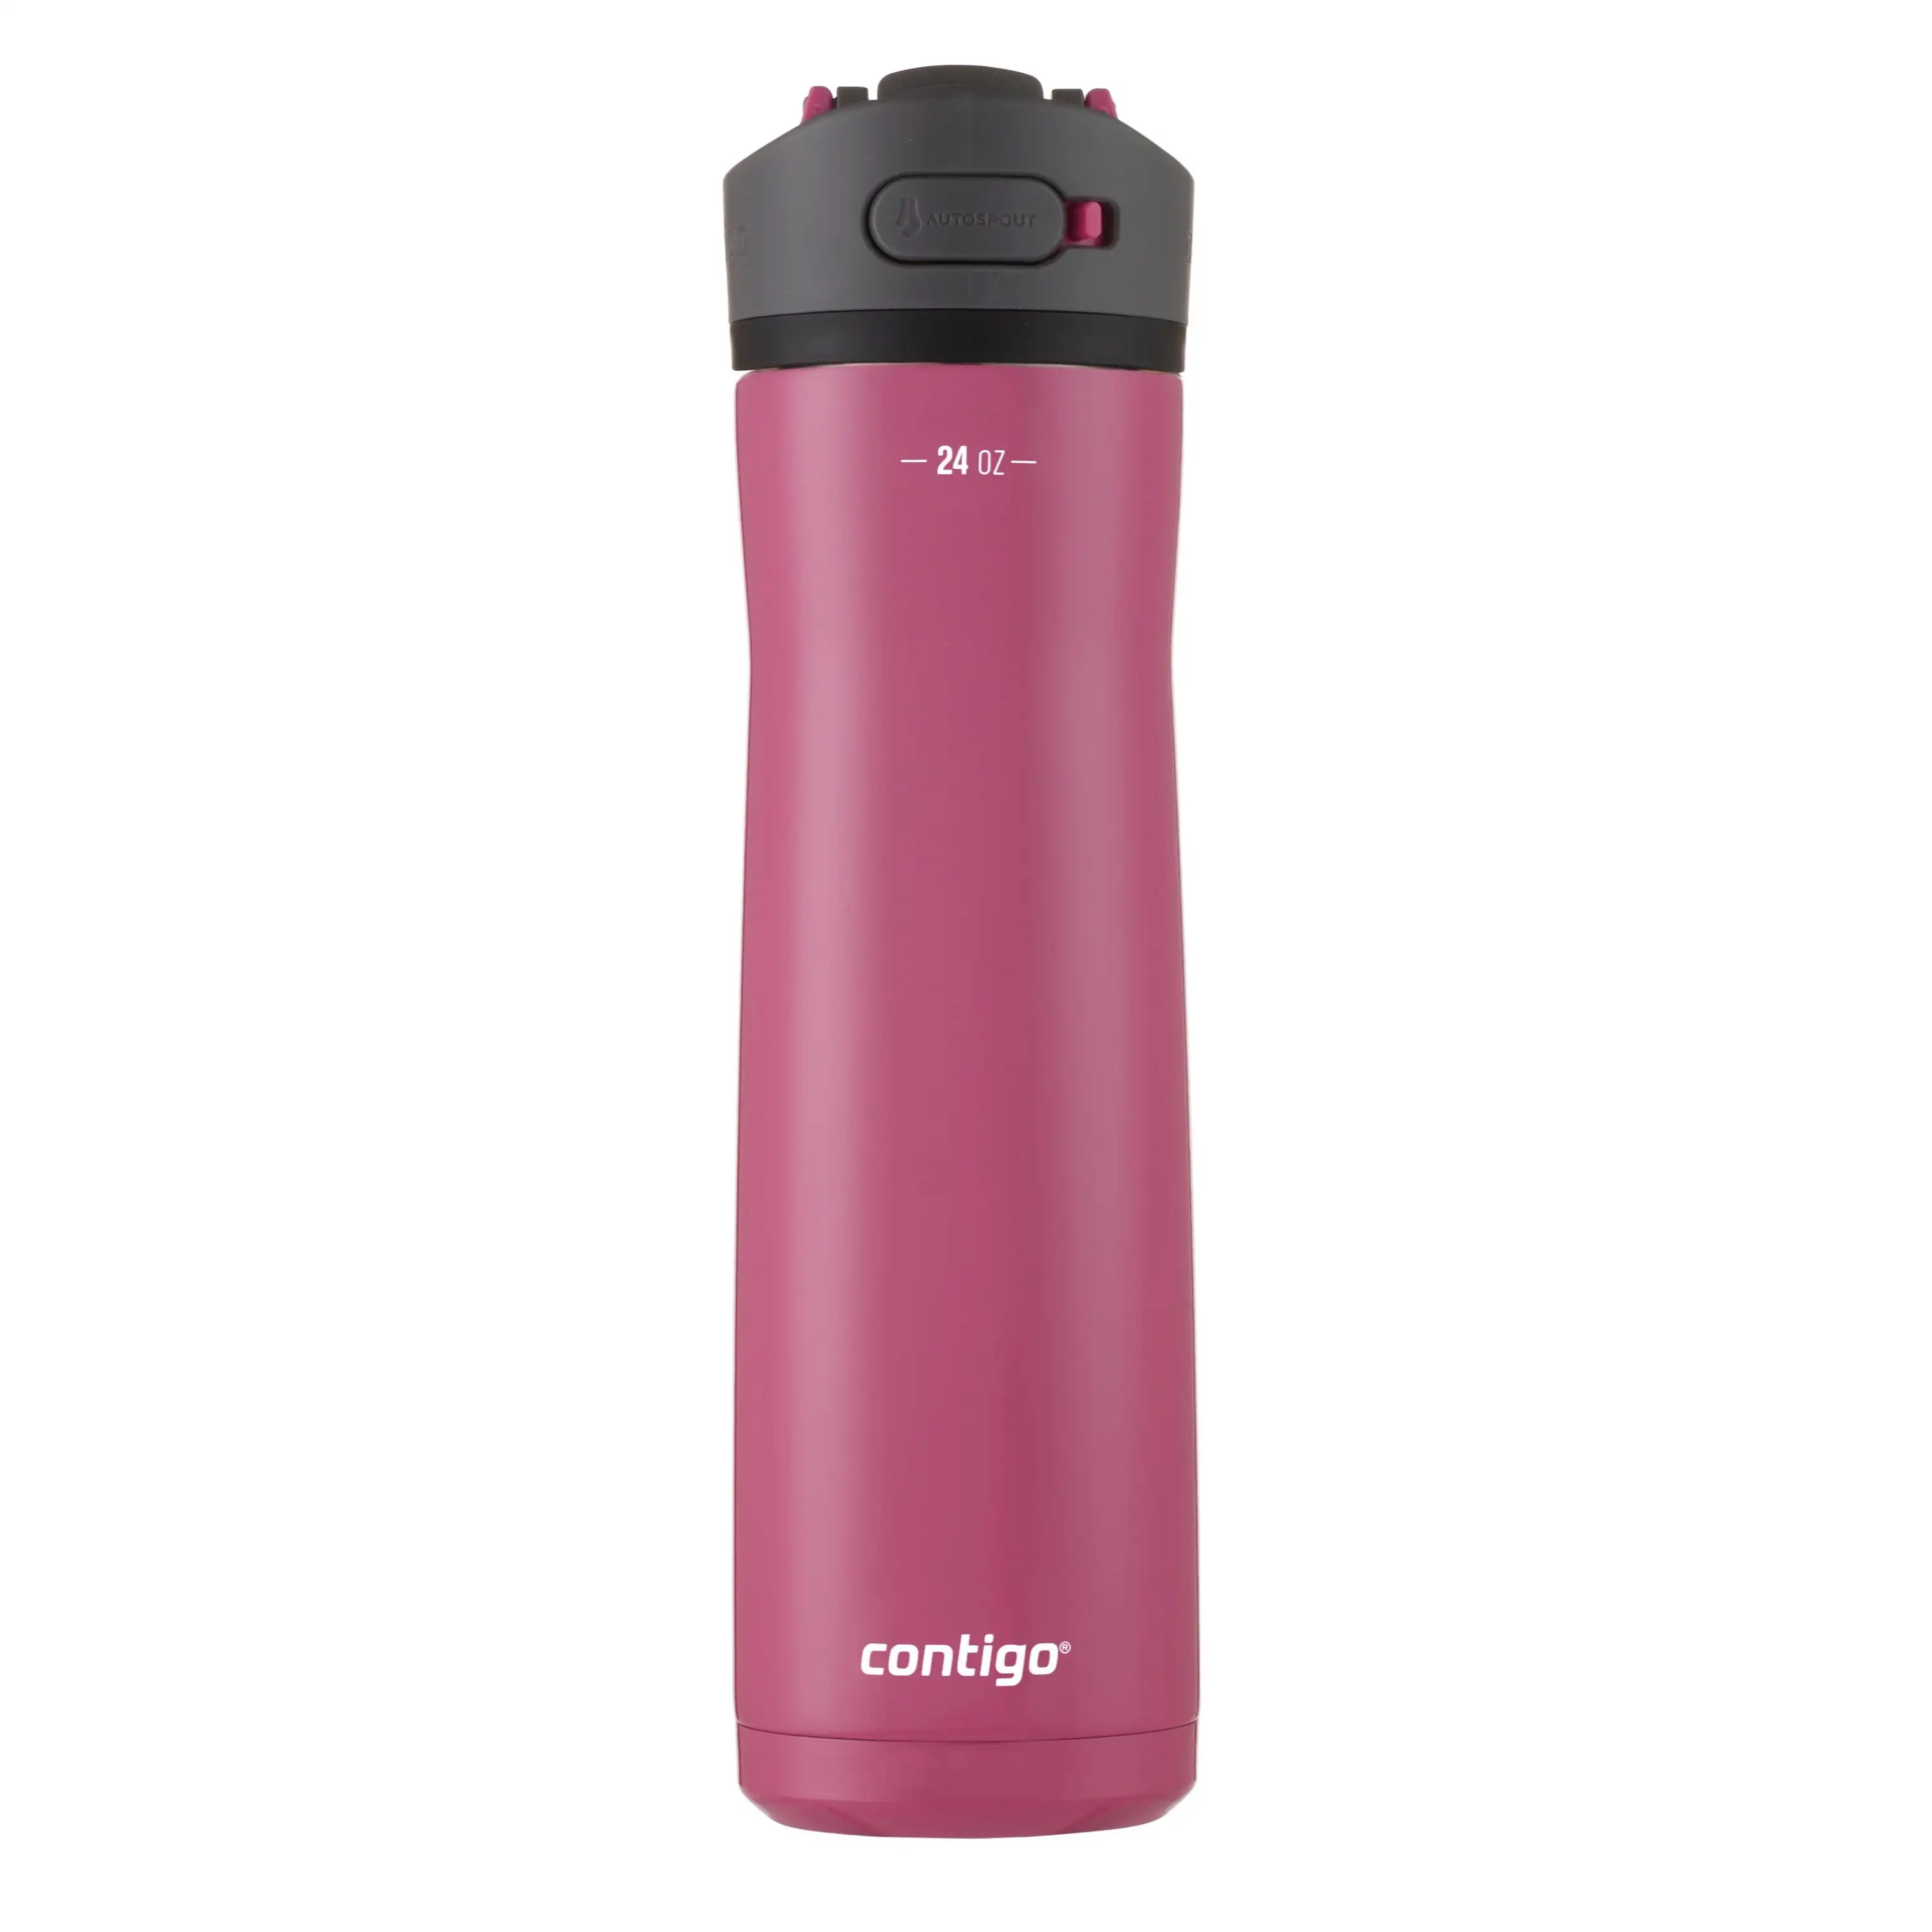 

Contigo Ashland 2.0 Stainless Steel Water Bottle with Autospout Straw Lid in Pink, 24 fl oz.